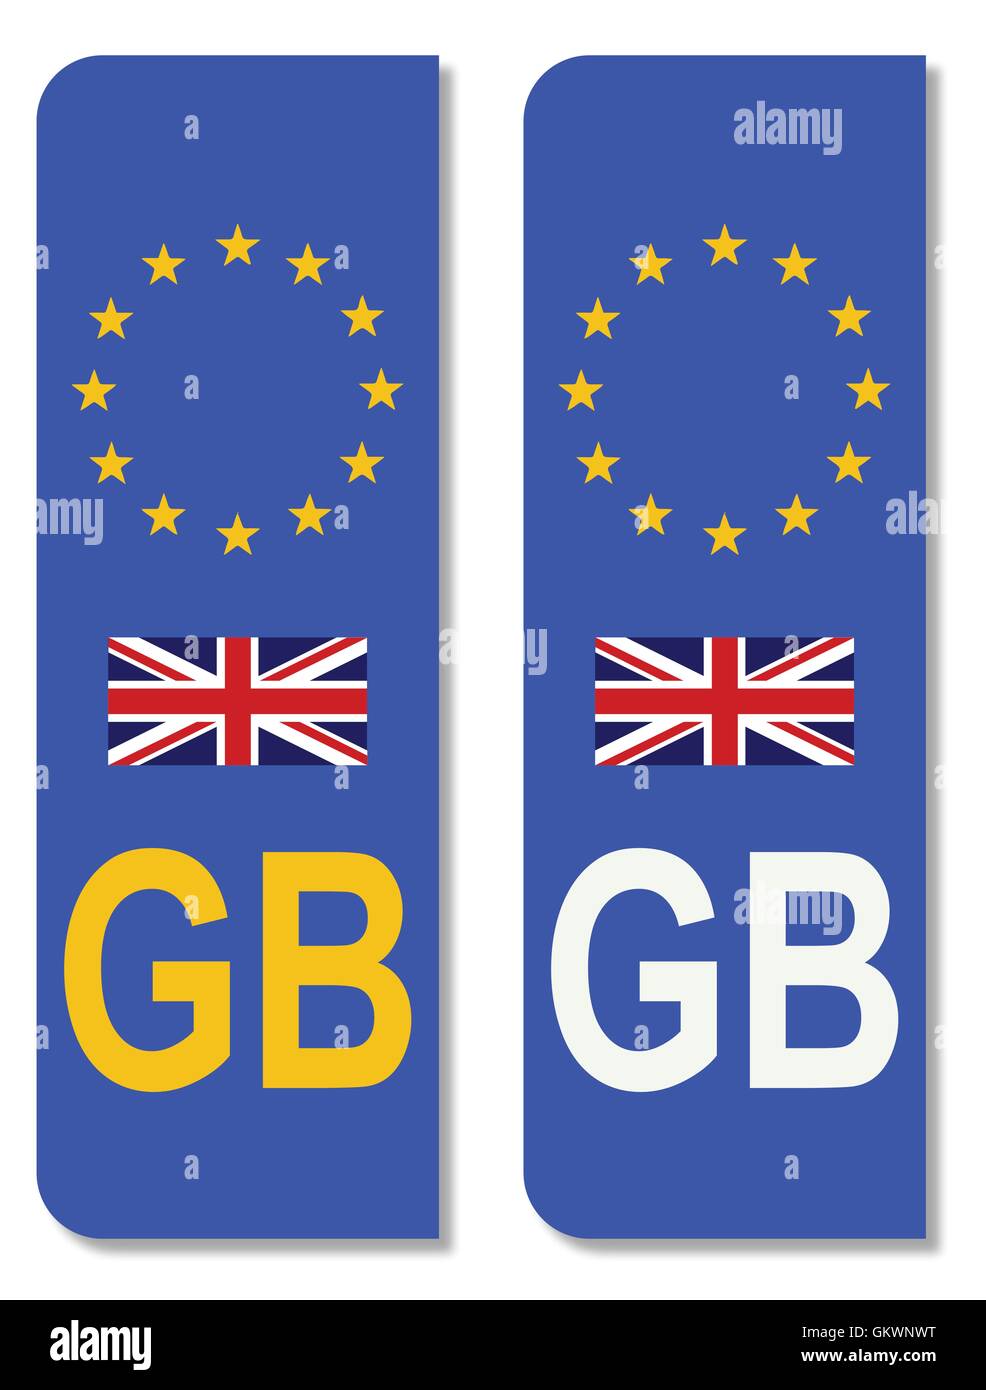 EU Number Plate Identifier For Great Britain Stock Vector